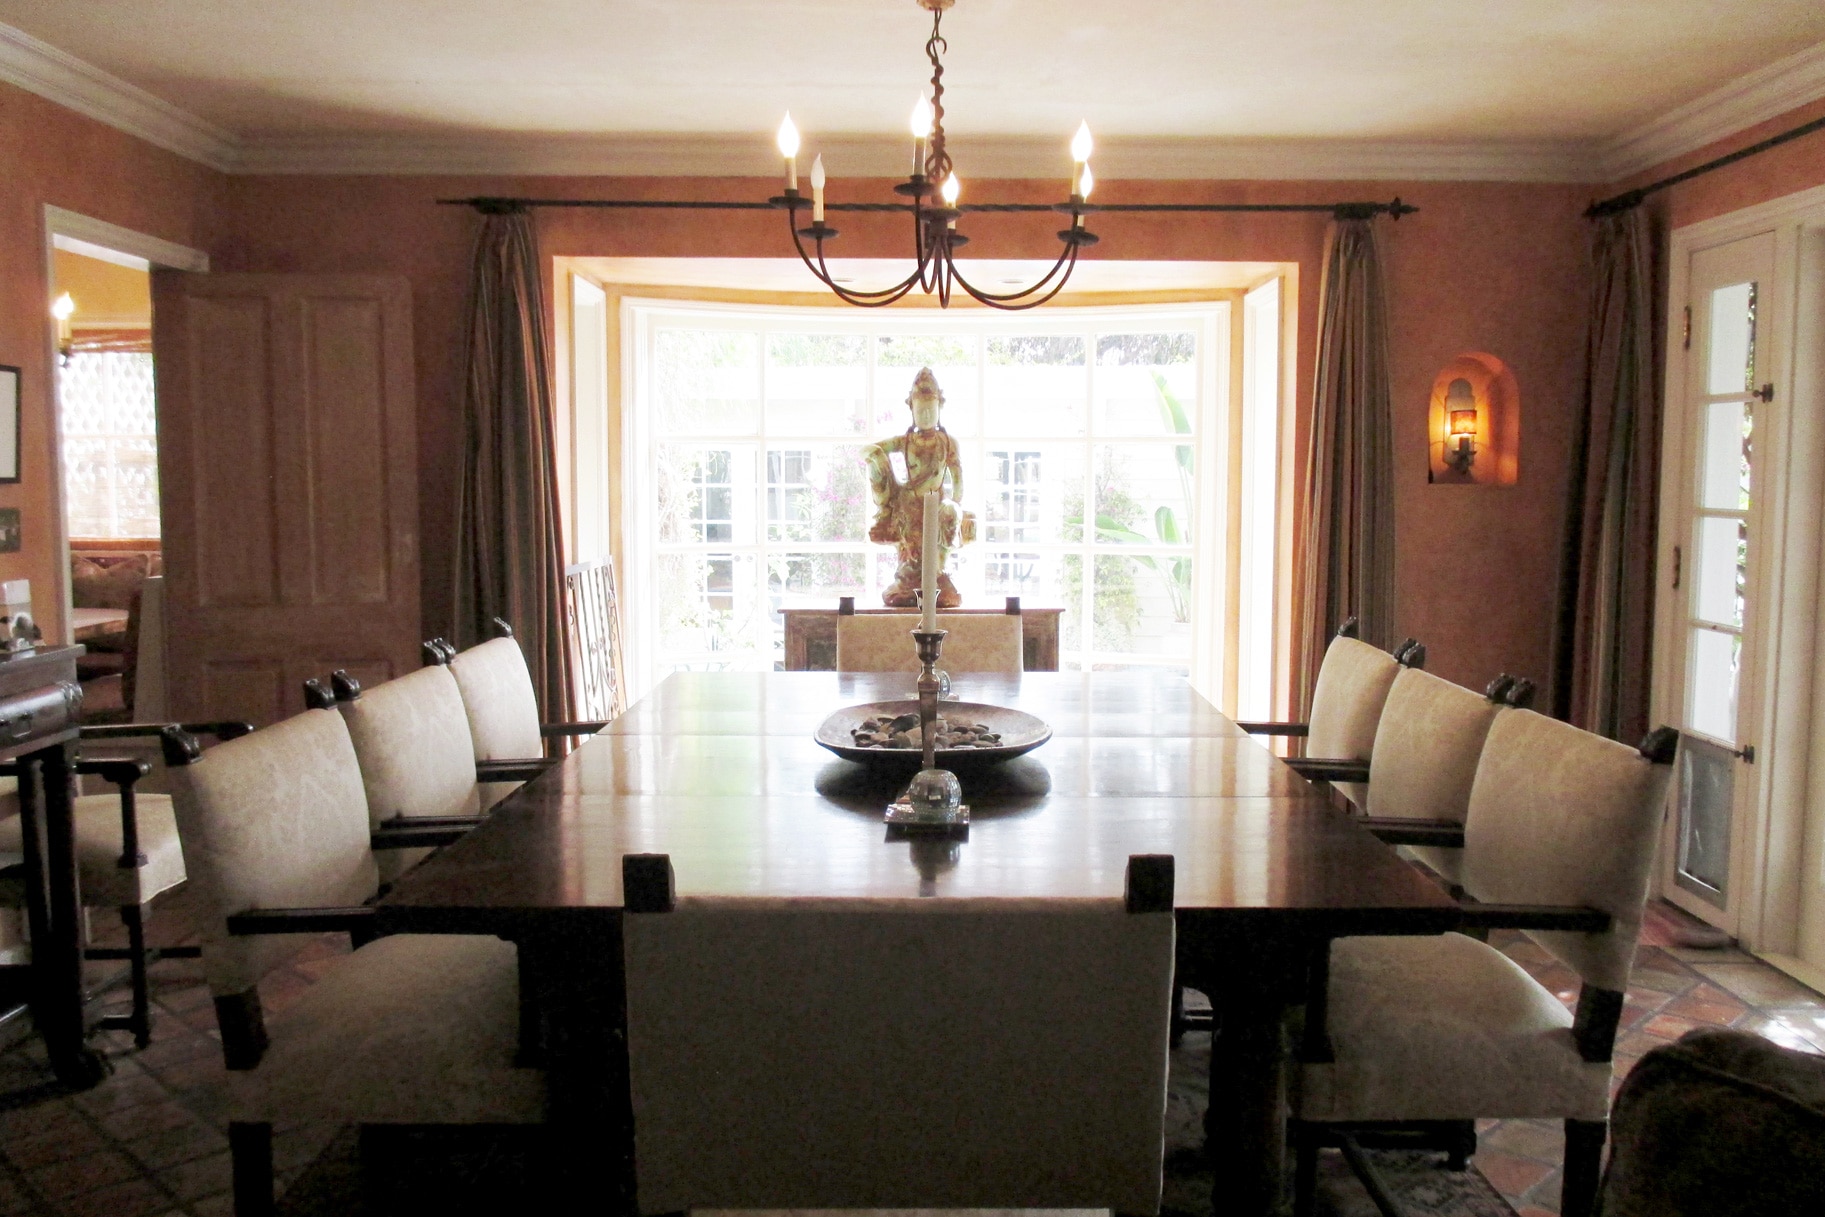 Lisa Rinna's dining room as seen on Real Housewives Of Beverly Hills Season 5